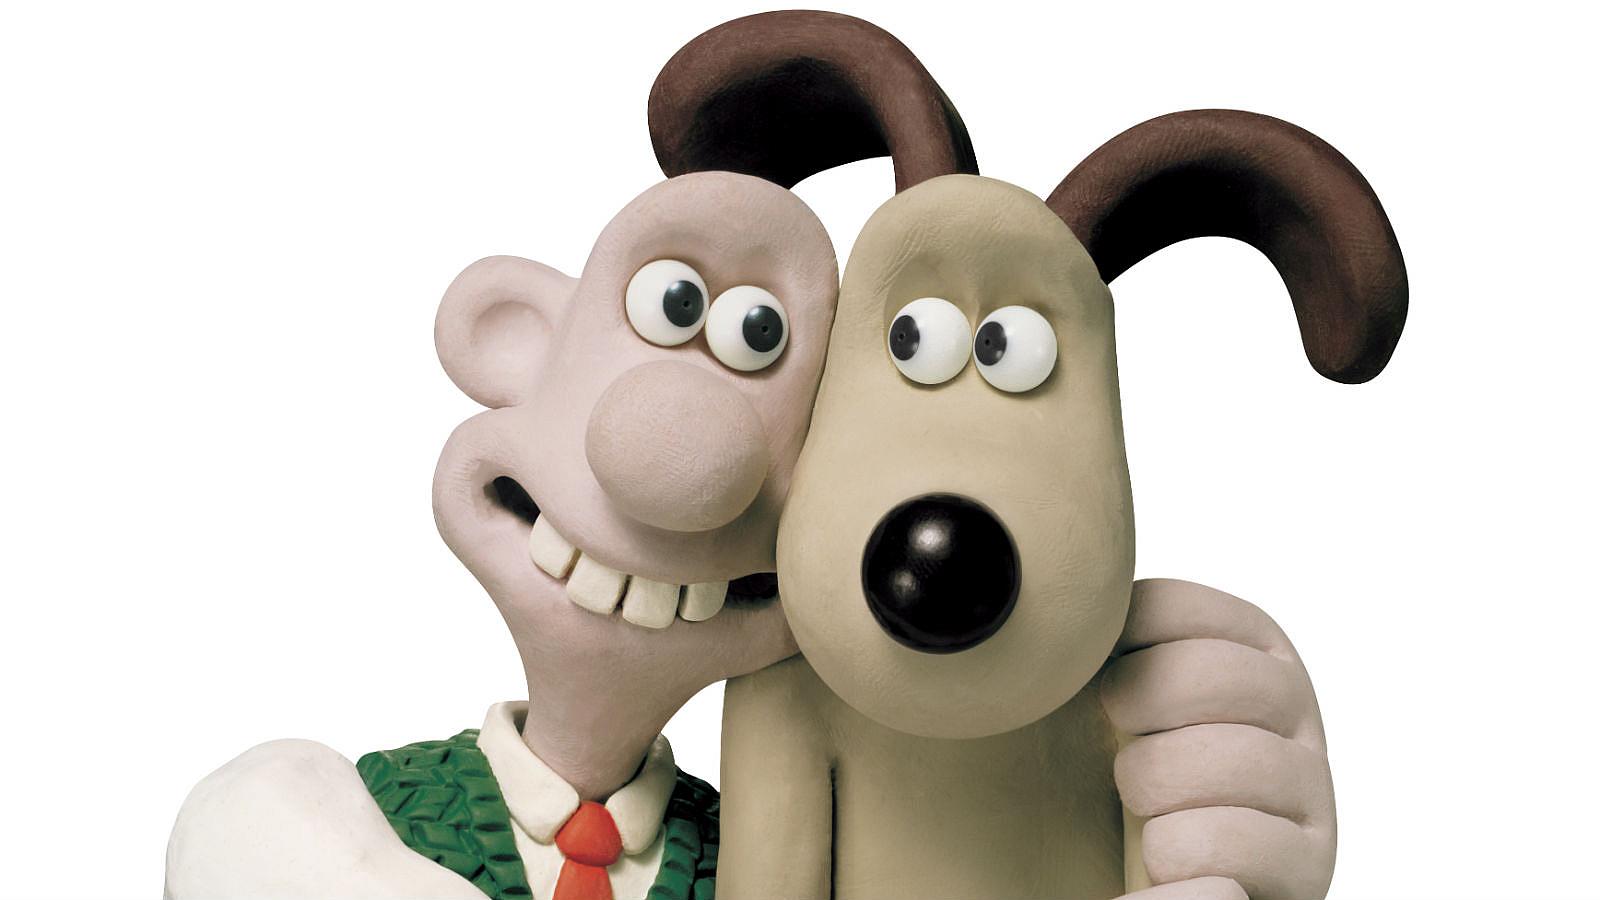 Wallace & Gromit and Peaky Blinders to live again in immersive VR initiatives